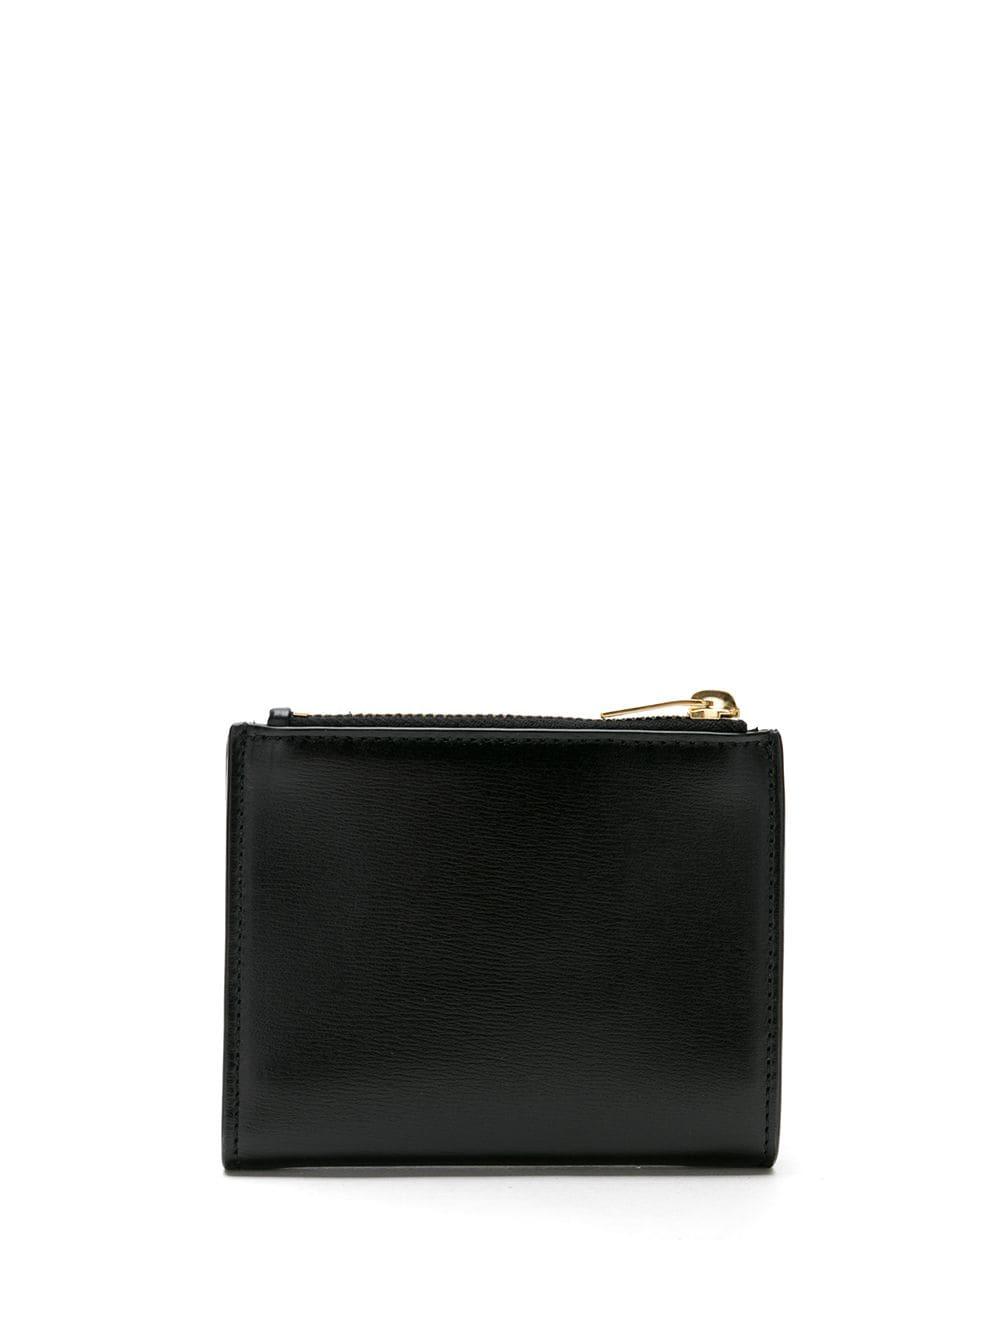 Saint Laurent Leather Ysl Compact Wallet in Black - Lyst